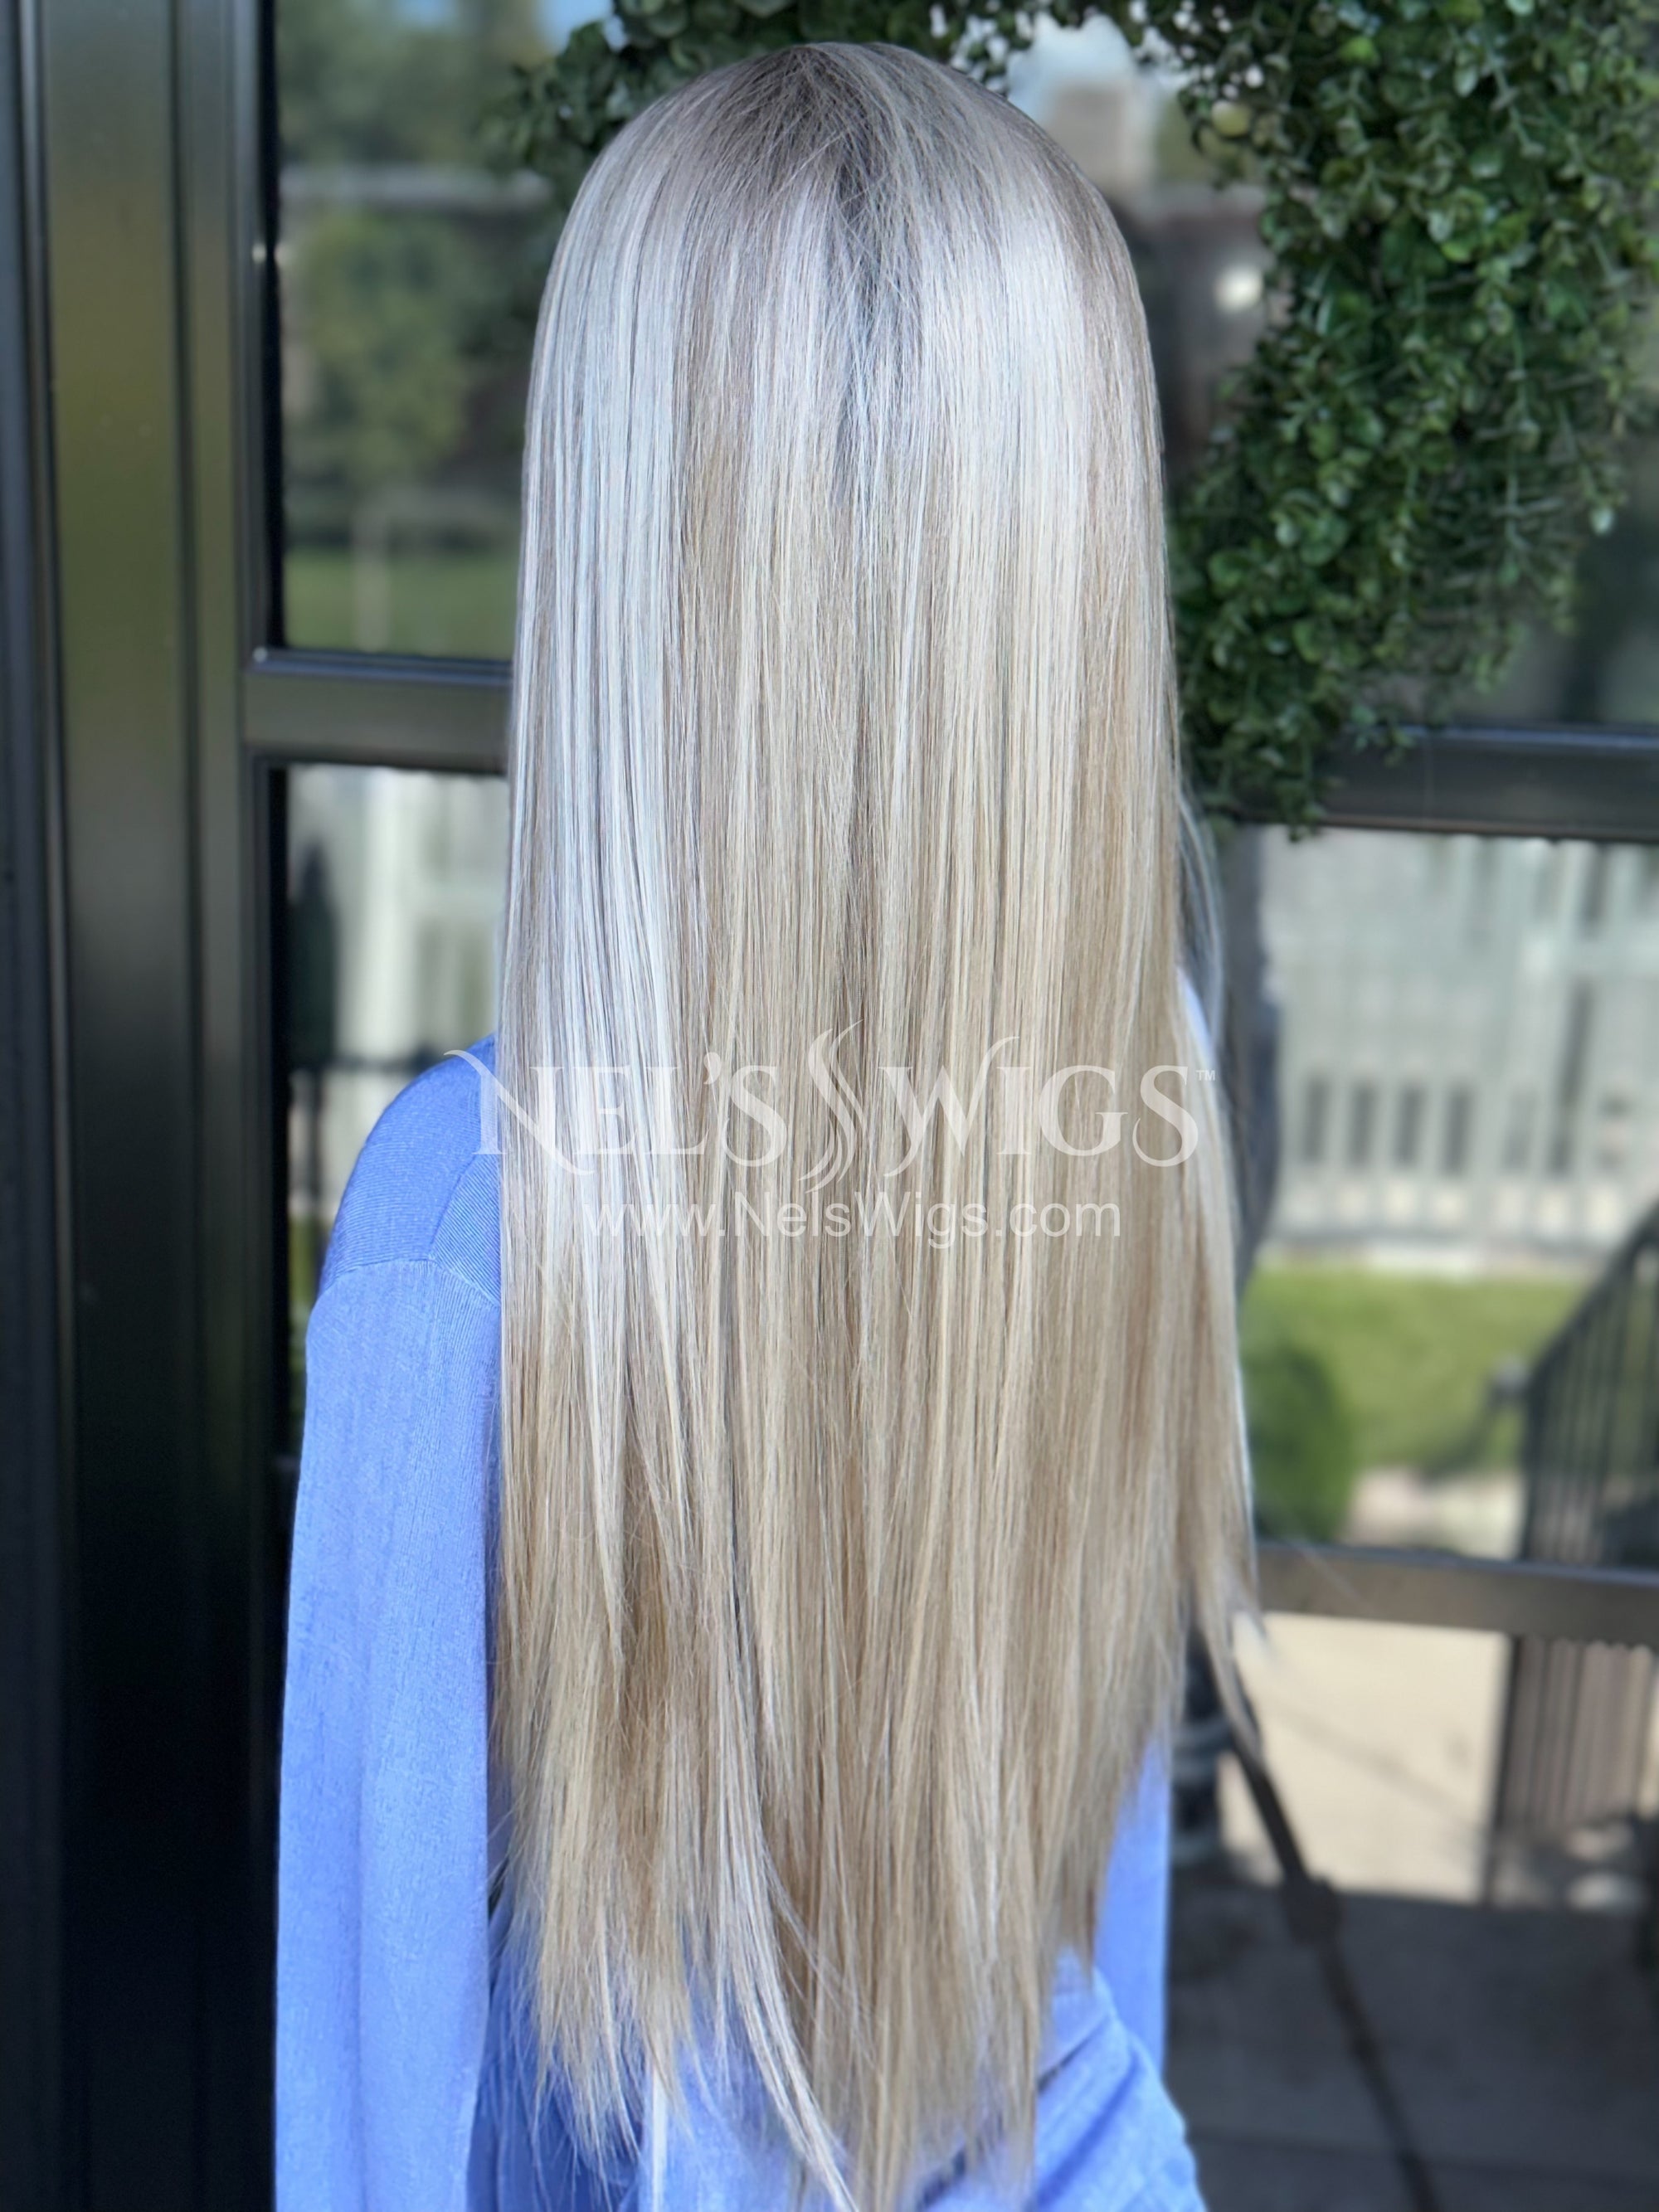 Lynn - Blonde with Champaign Highlights